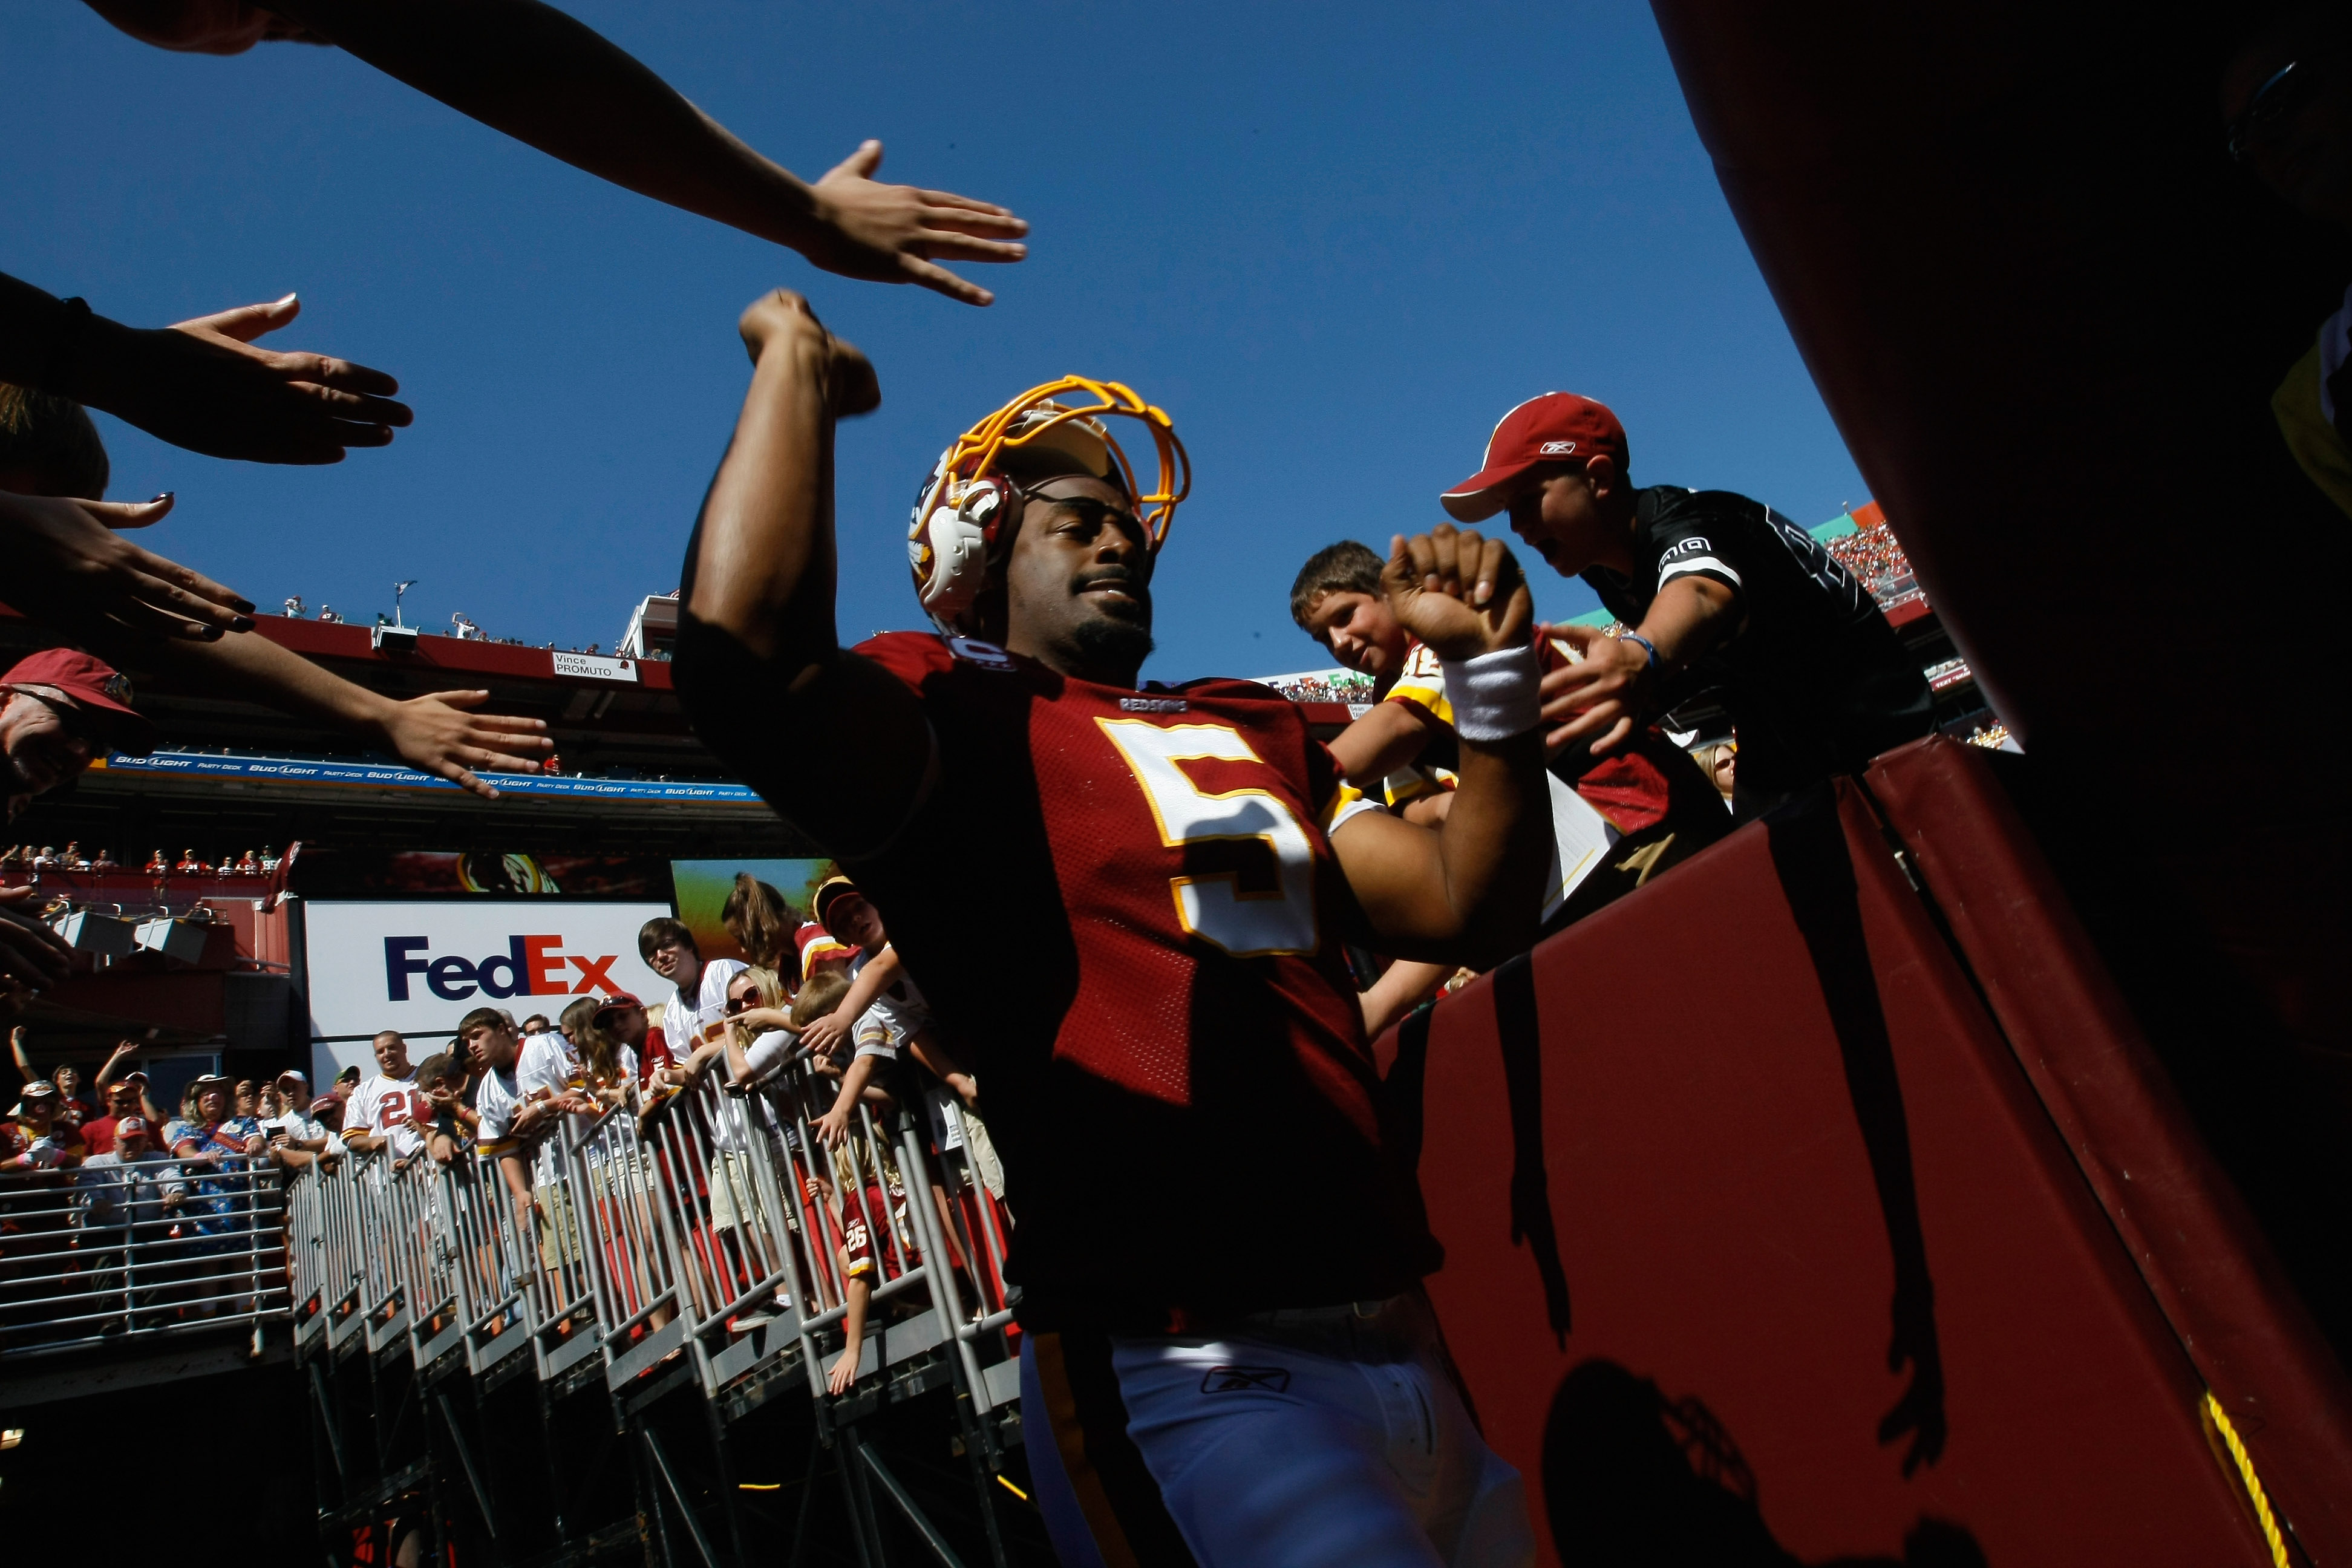 LANDOVER, MD - OCTOBER 10:  Quarterback Donovan McNabb #5 of the Washington Redskins greets fans before playing against the Green Bay Packers at FedExField on October 10, 2010 in Landover, Maryland.  (Photo by Win McNamee/Getty Images)